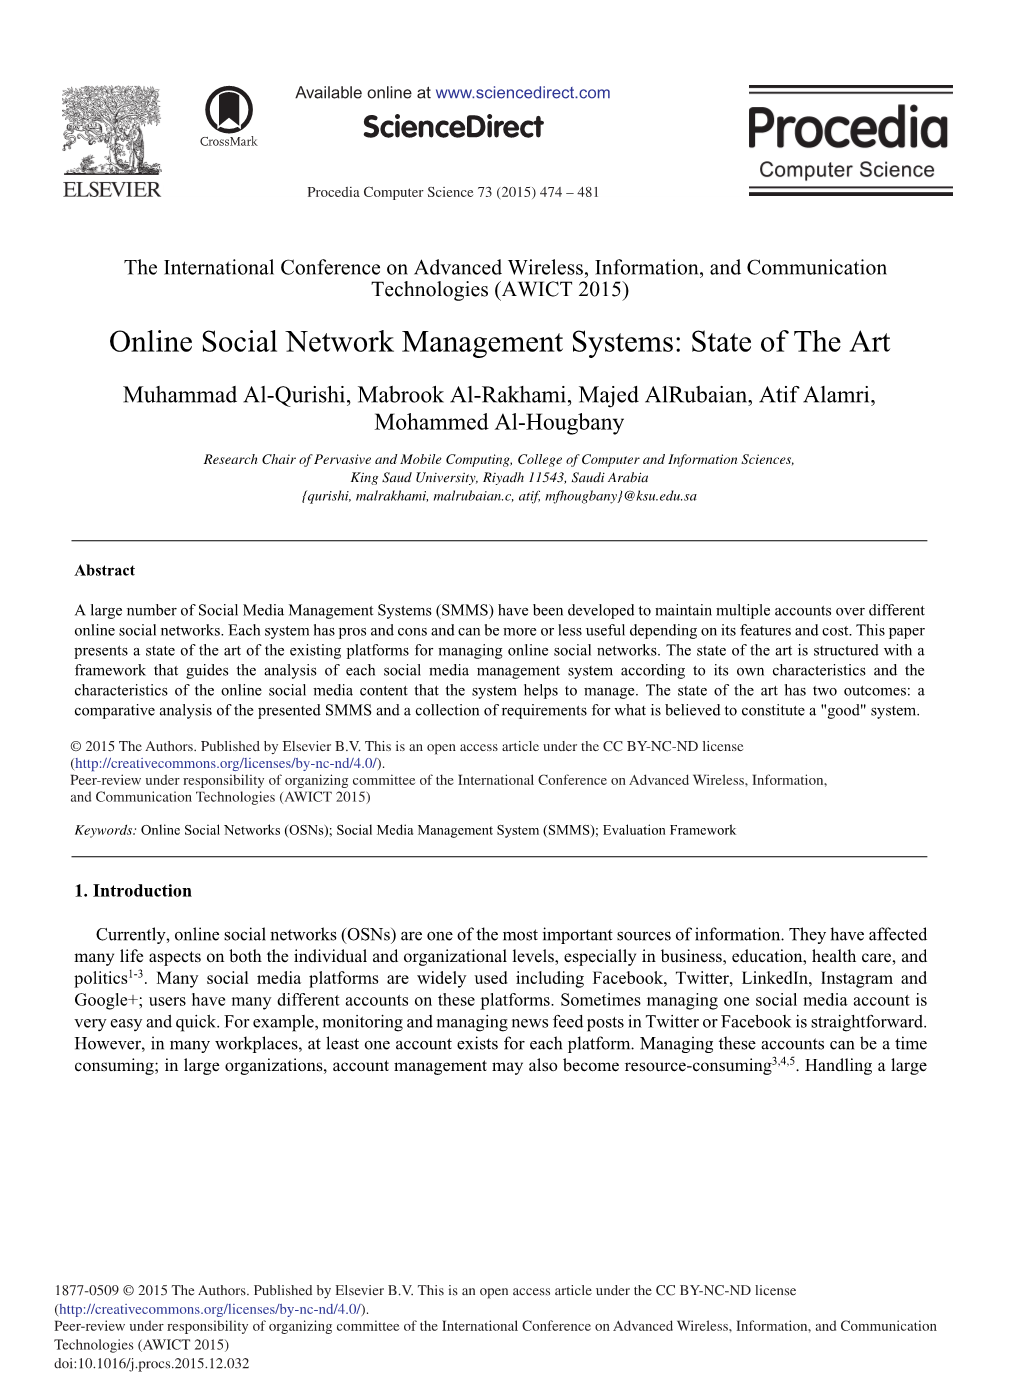 Online Social Network Management Systems: State of the Art